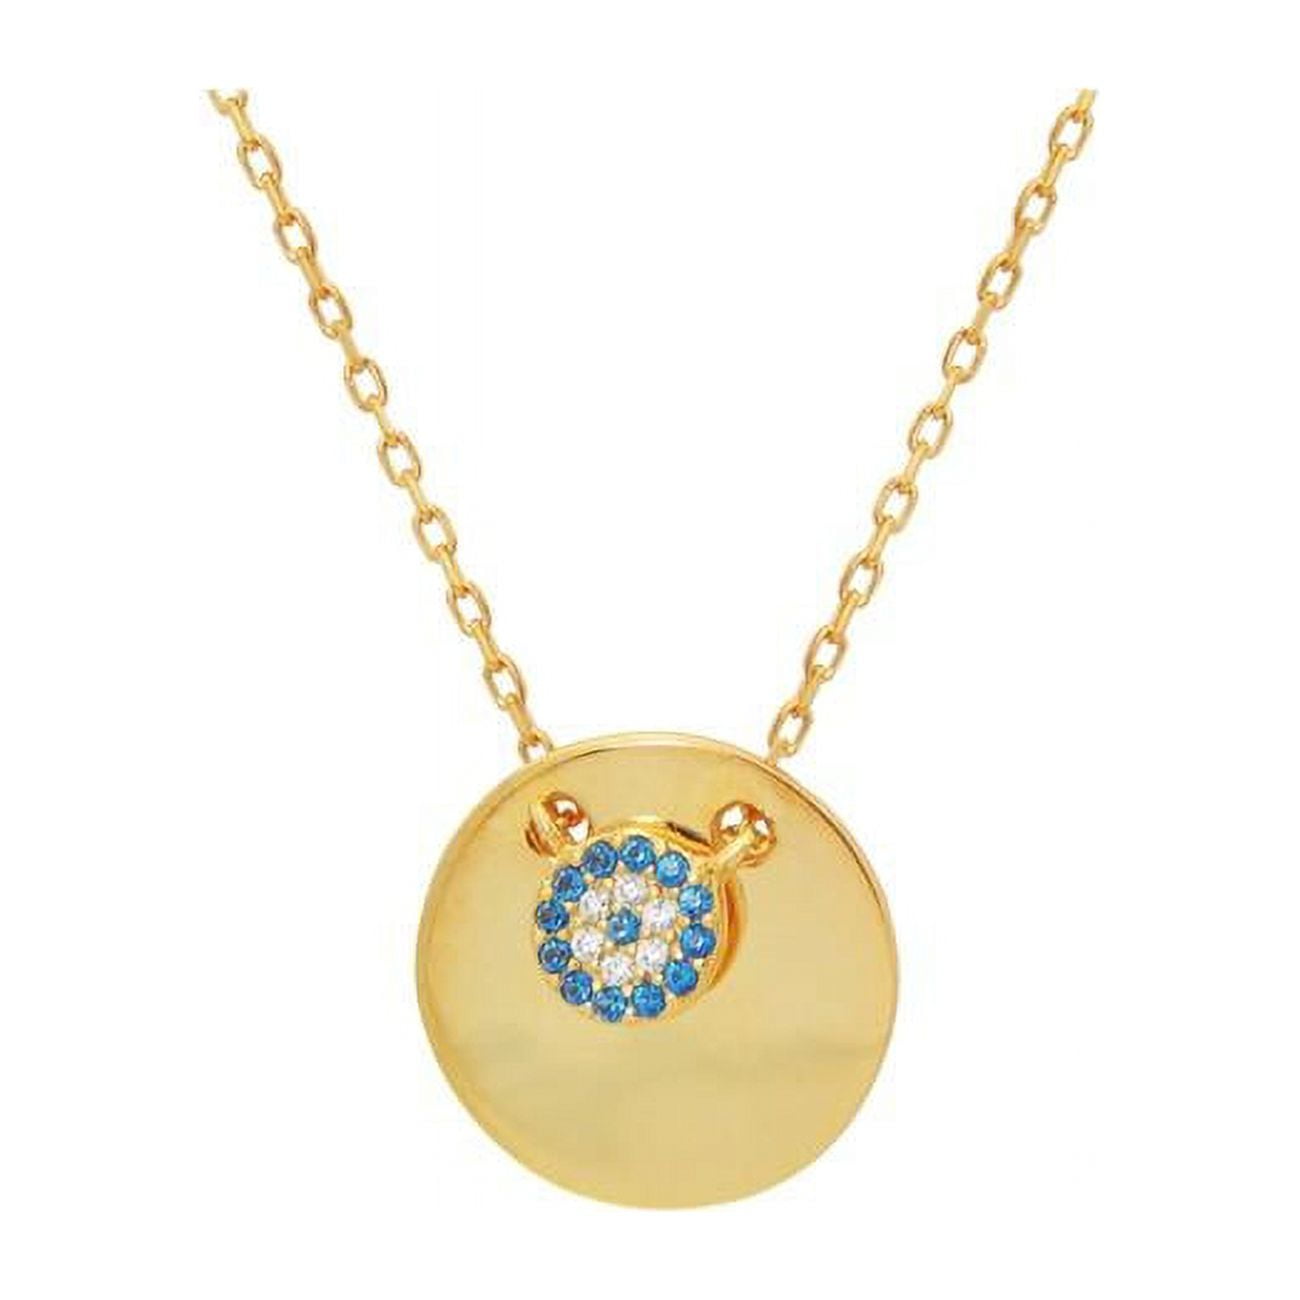 551158g 16 In. Mini Glimmering Evil Eye Disc Pendant Necklace In Gold Plated Sterling Silver